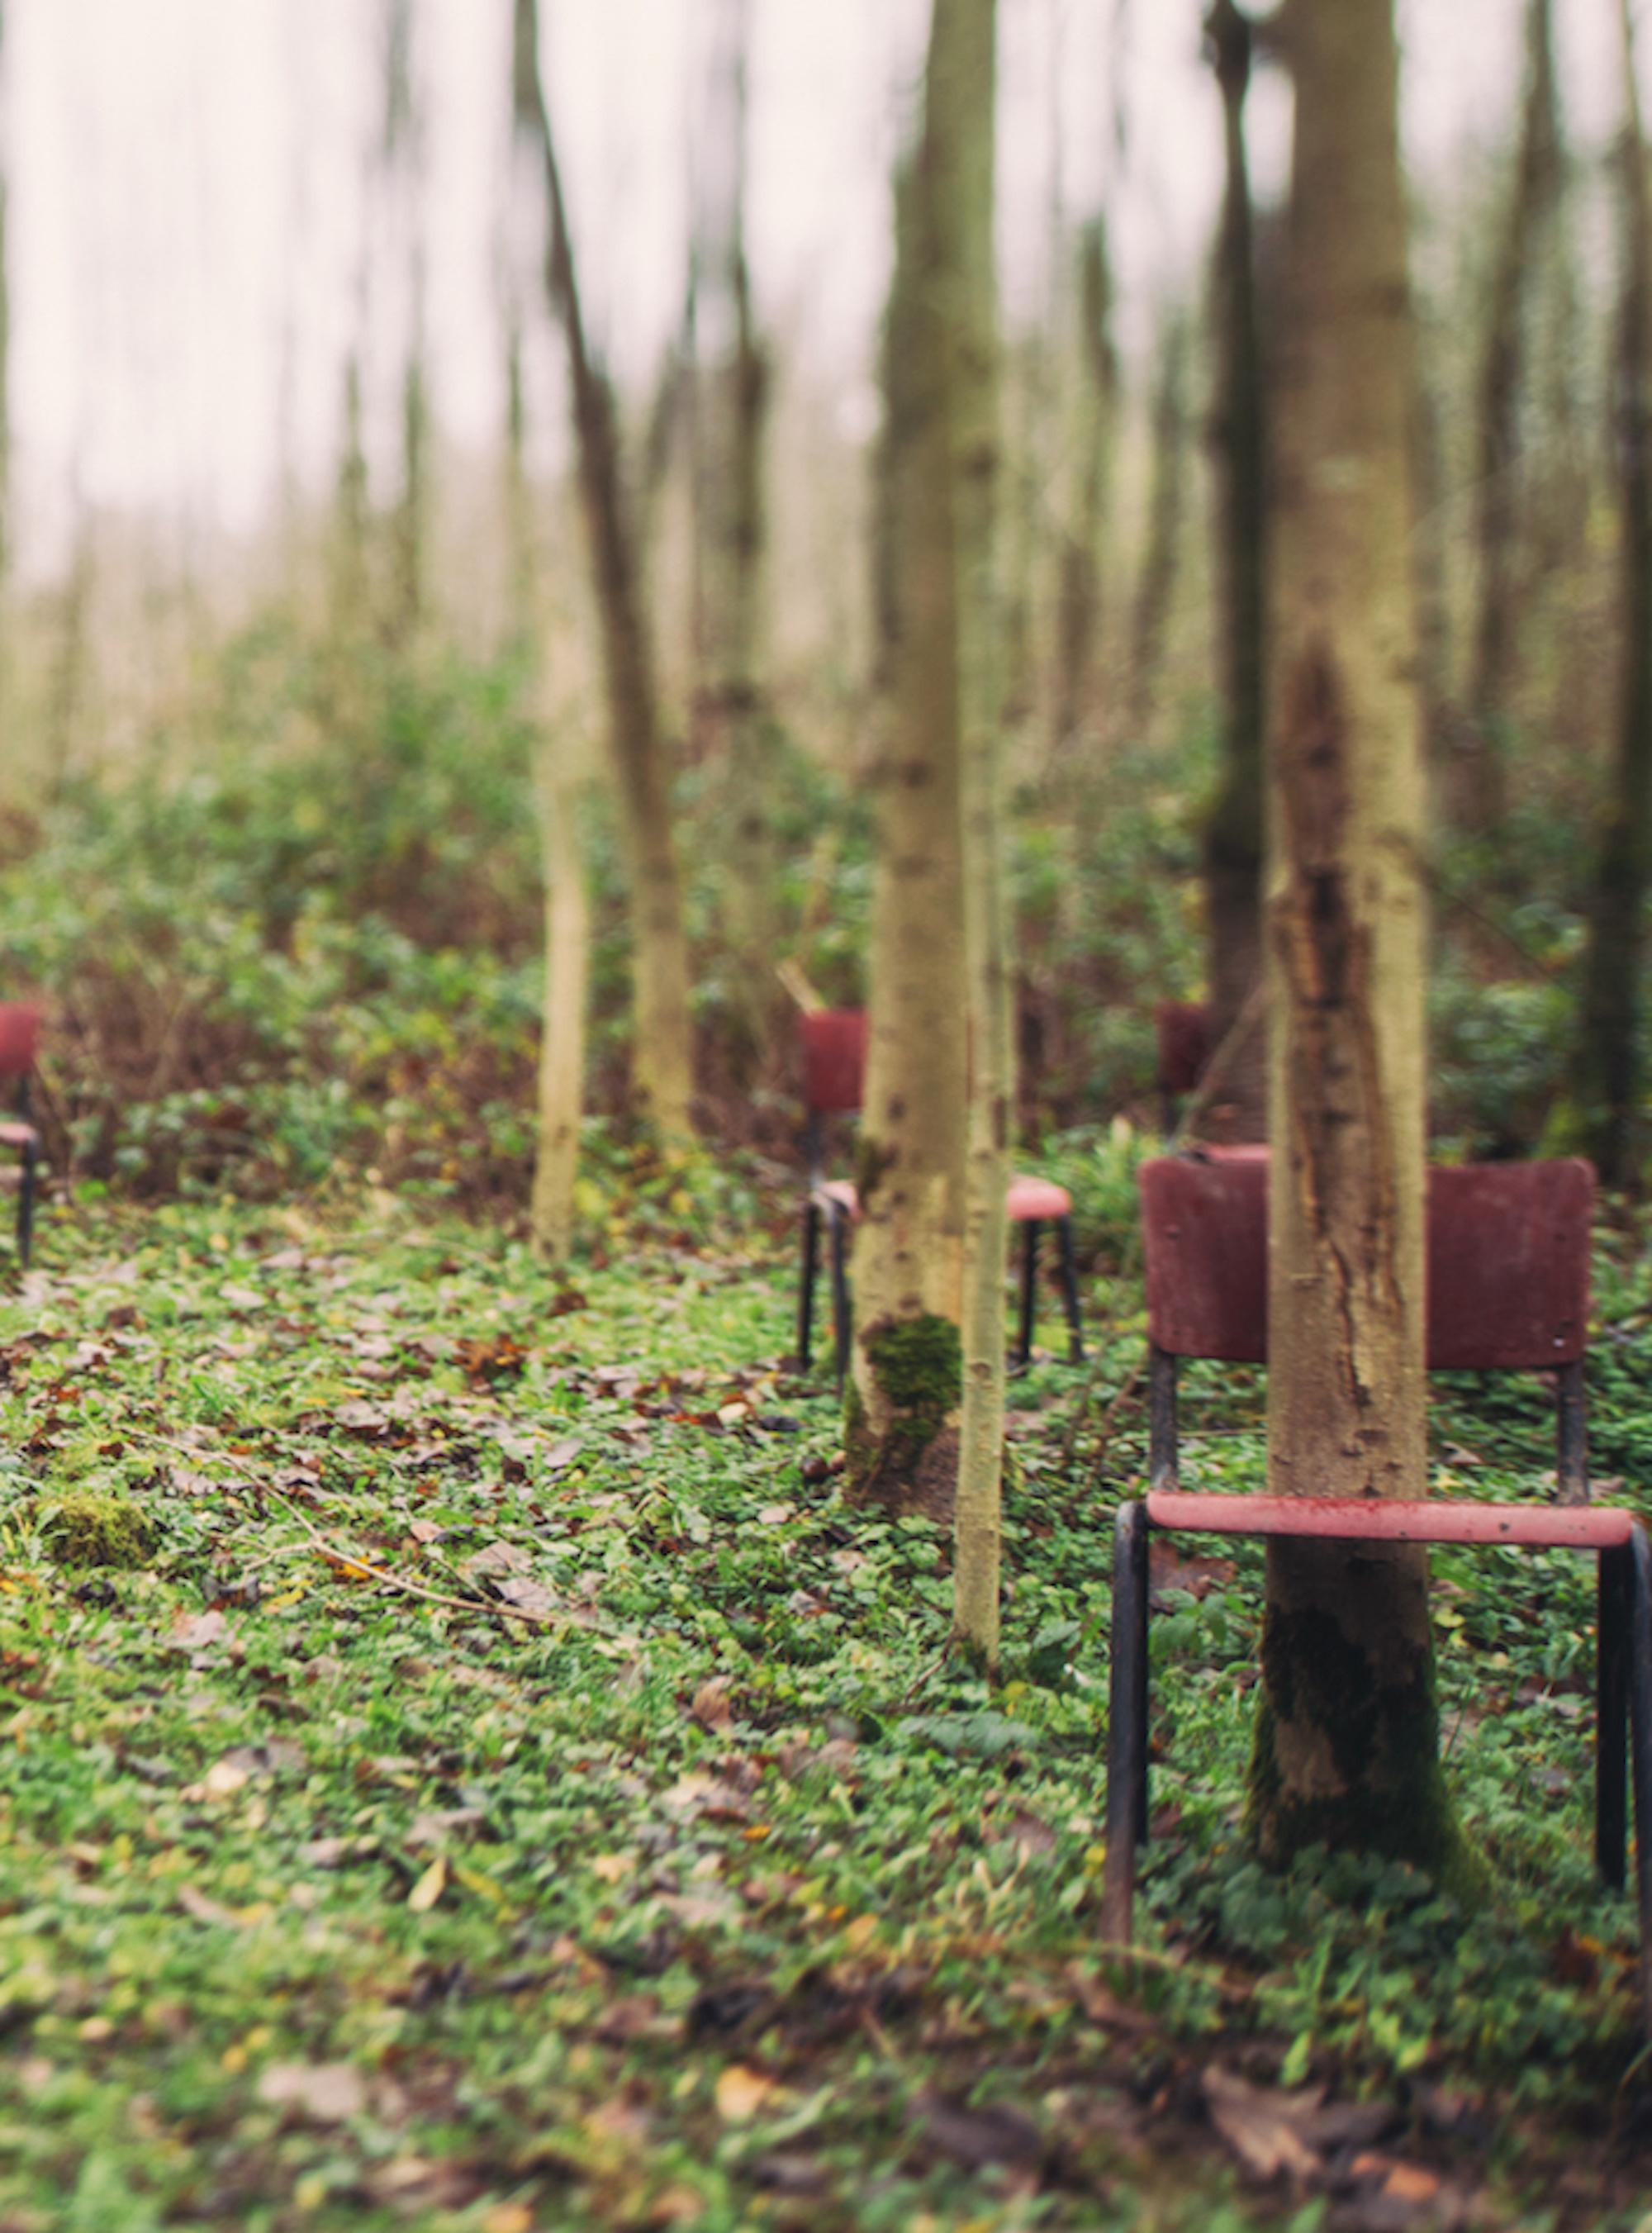 Orchestral by Gina Soden - Abandoned place, urbex photography, forest, chairs For Sale 4